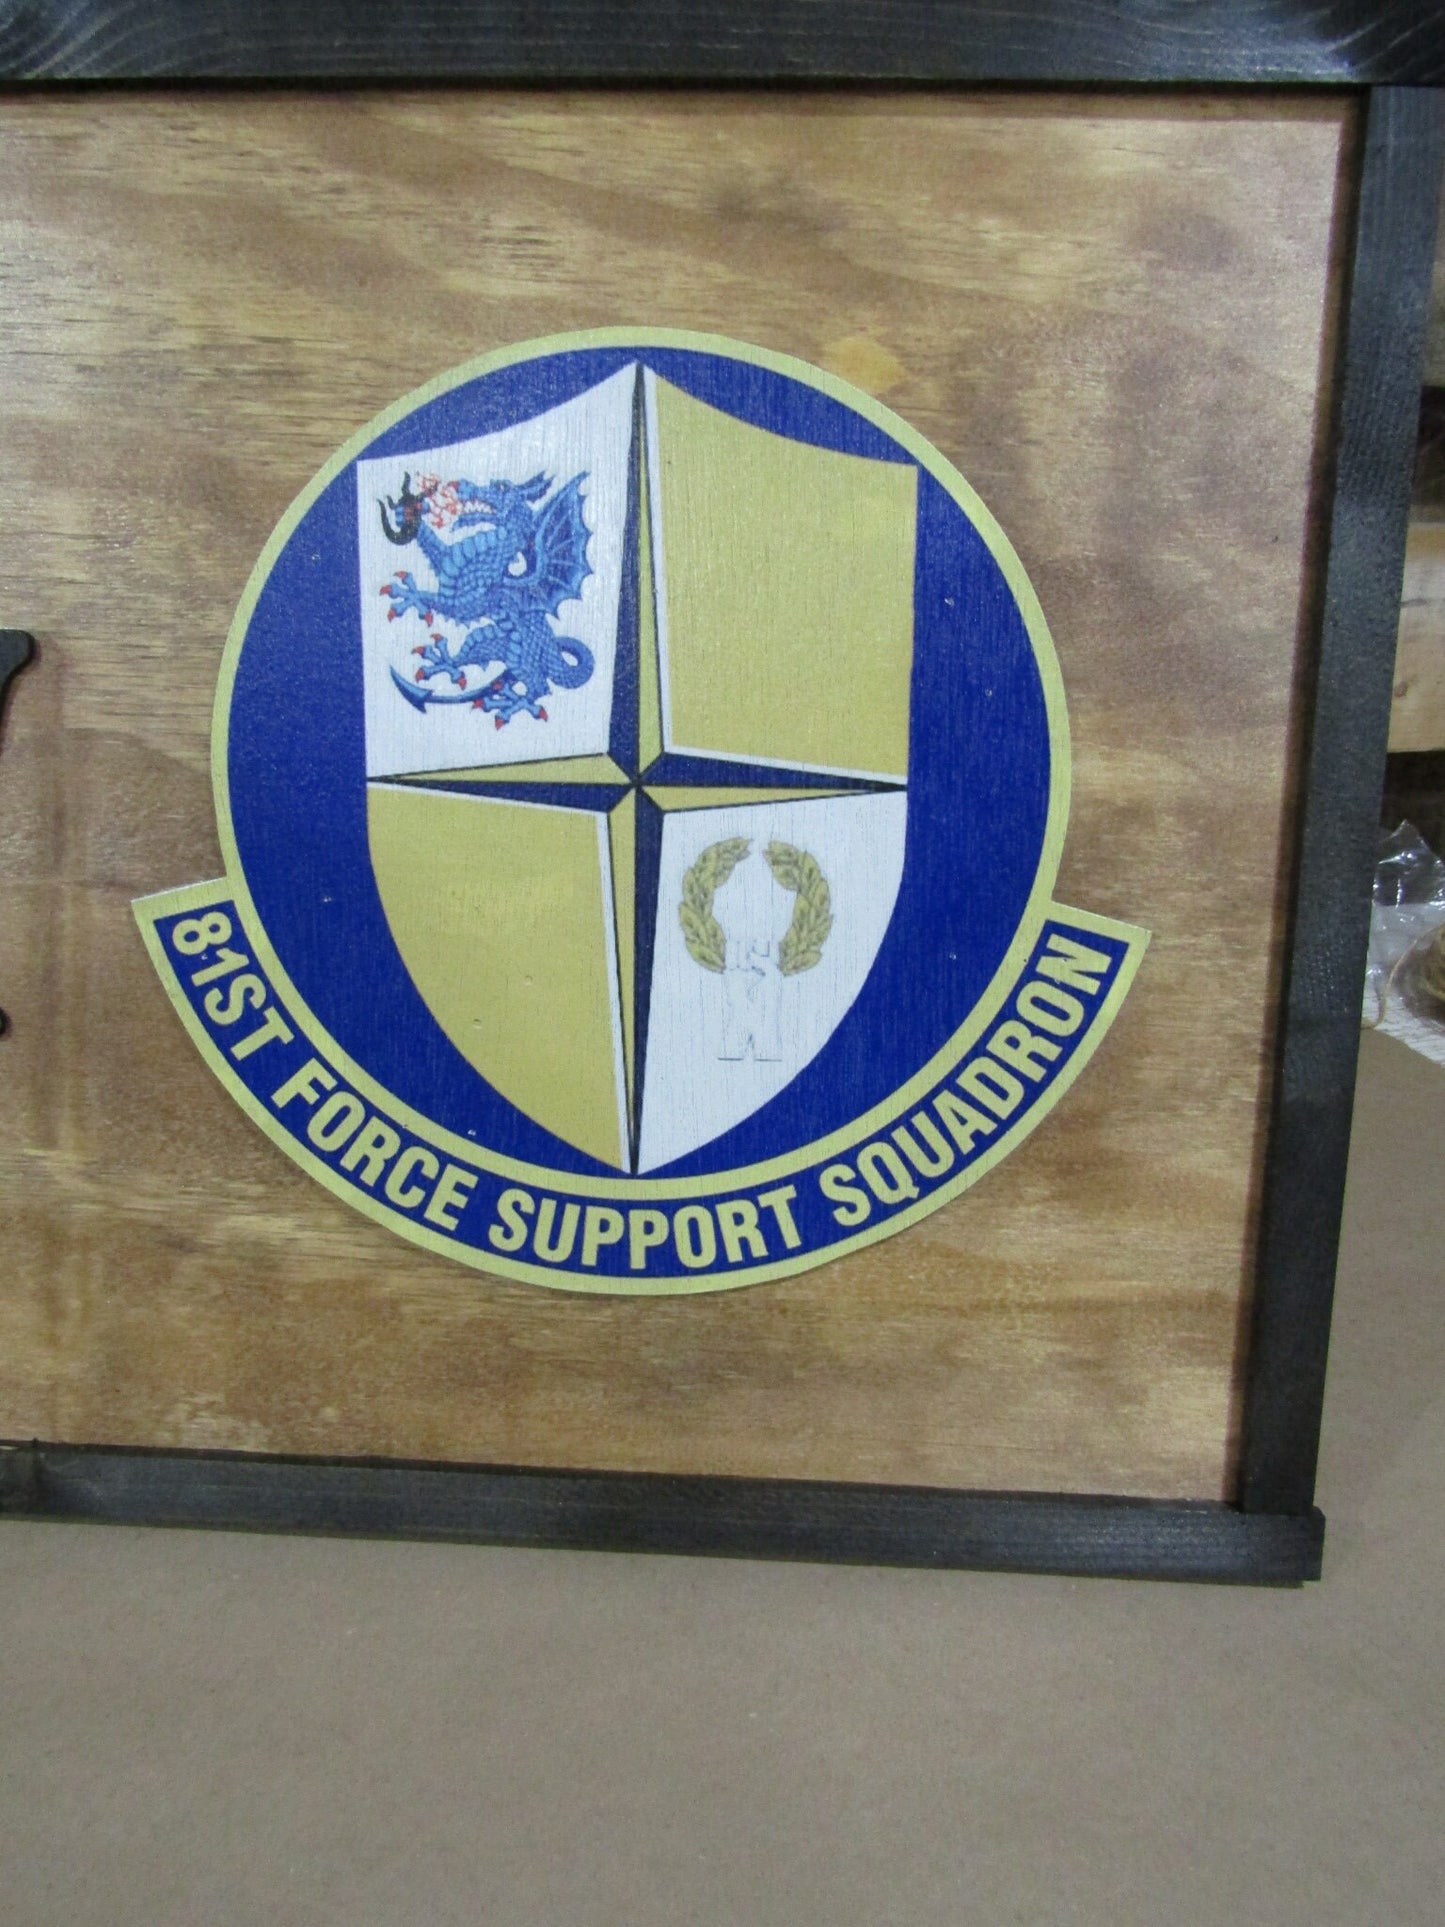 Custom Wooden Personalized Sign Serve Like A Champion Sheild Support Squadron Honor Seal 3D Emblem Raised Text Printed Logo Handmade Large